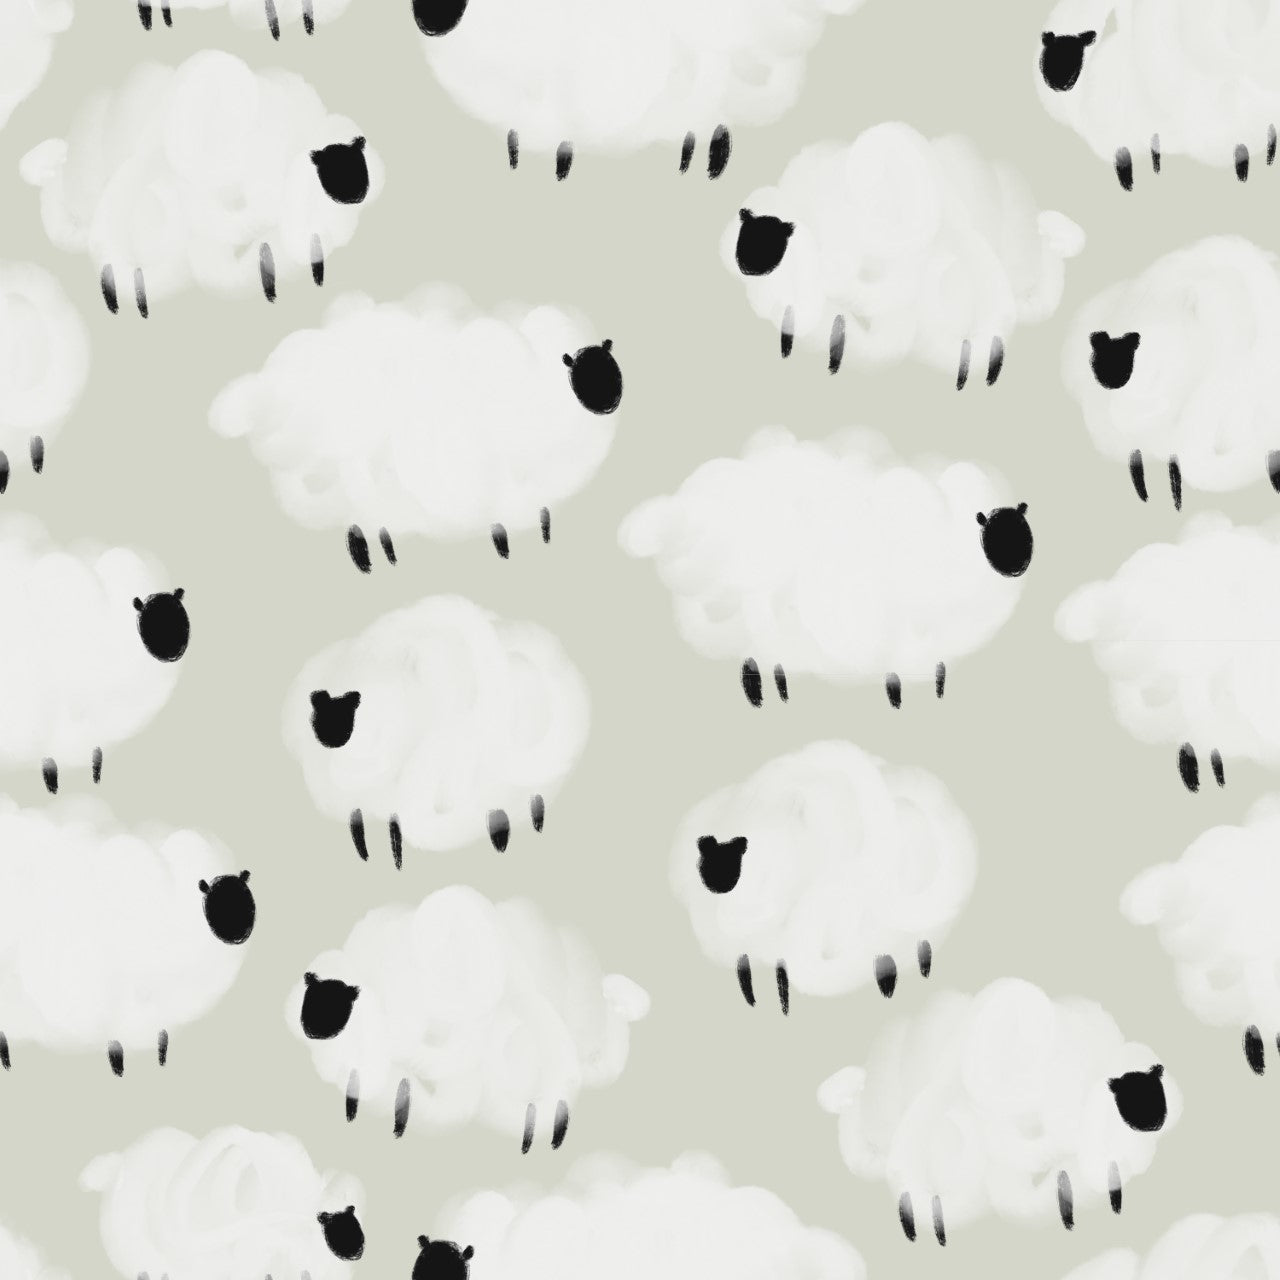 Counting sheep cute lambs on pastel green background easy to install and remove peel and stick custom wallpaper available in different lengths/sizes locally created and printed in Canada. Removable, washable, durable, commercial grade, customizable and water proof.